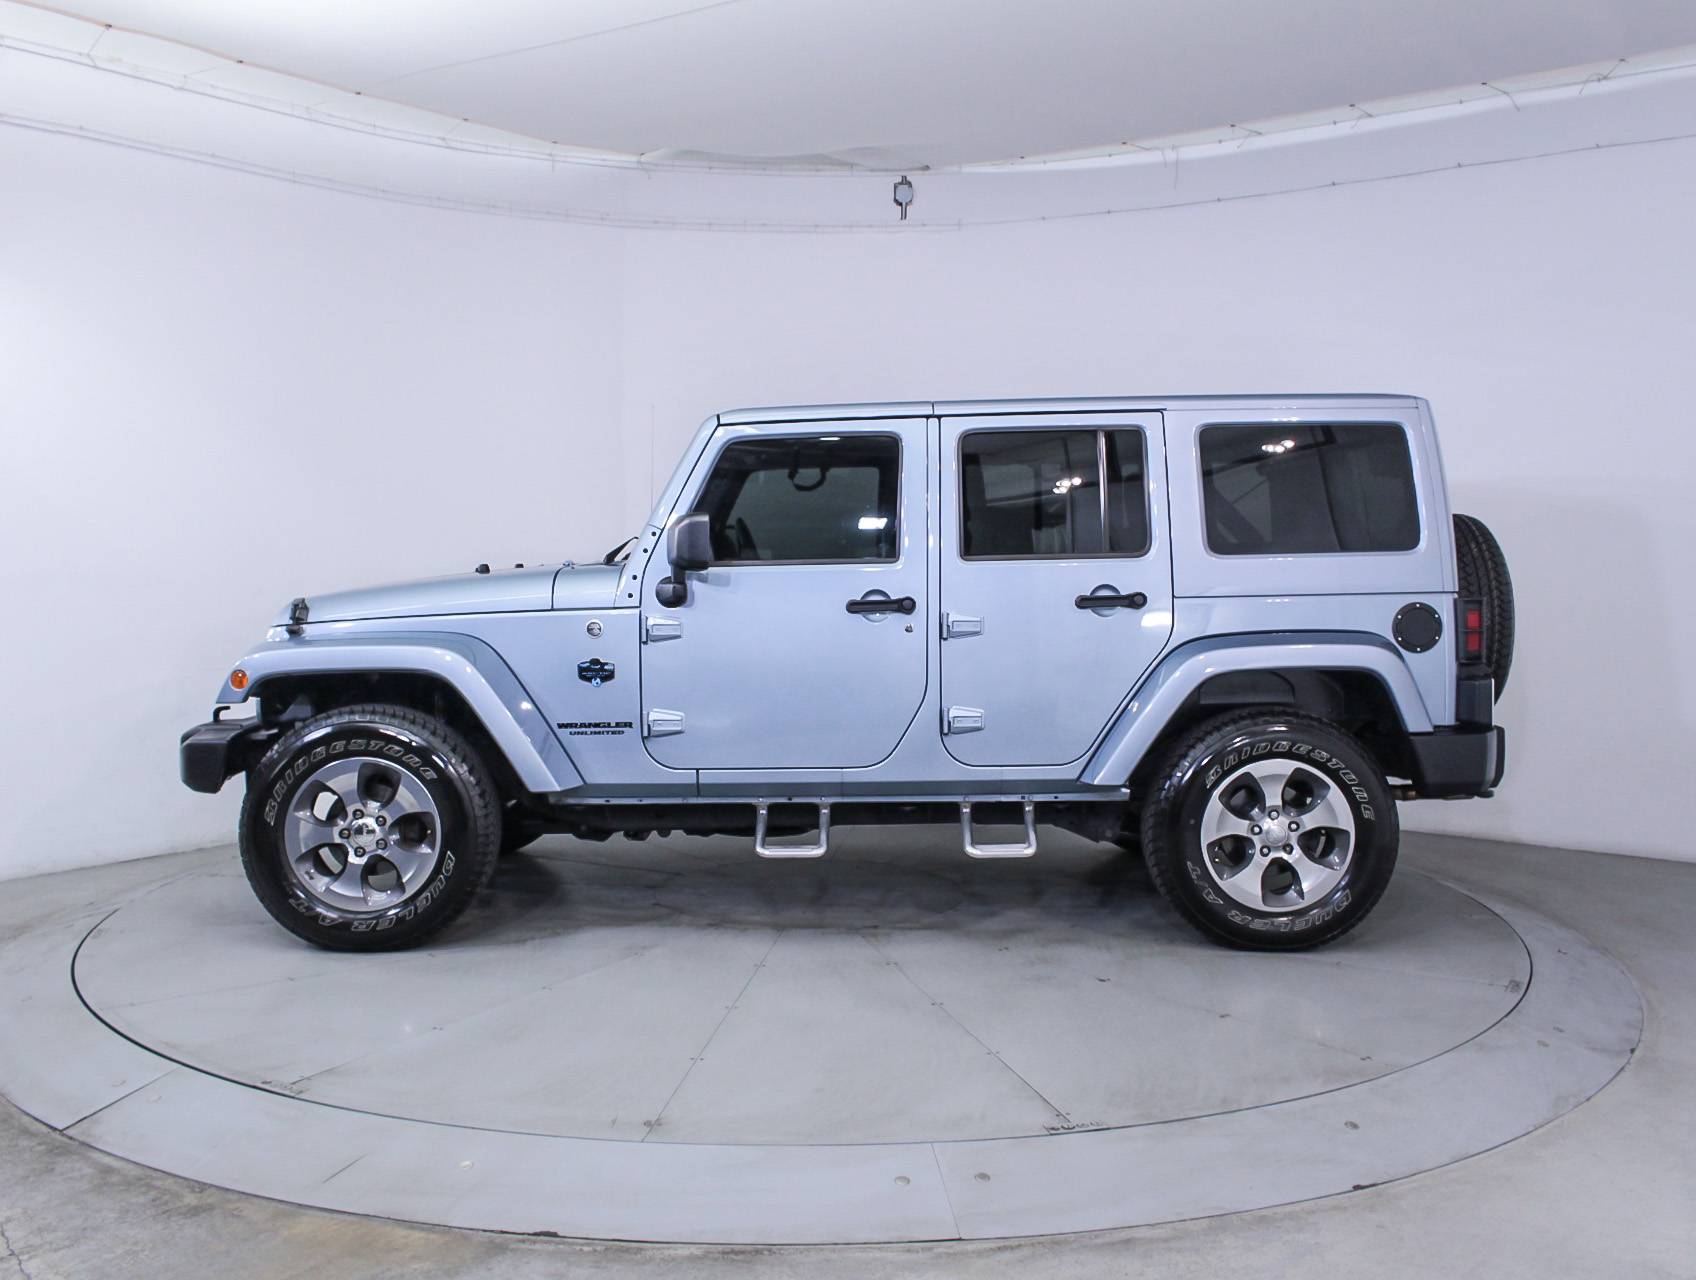 Used 2012 JEEP WRANGLER UNLIMITED Sahara Artic Edition for sale in MIAMI |  85961